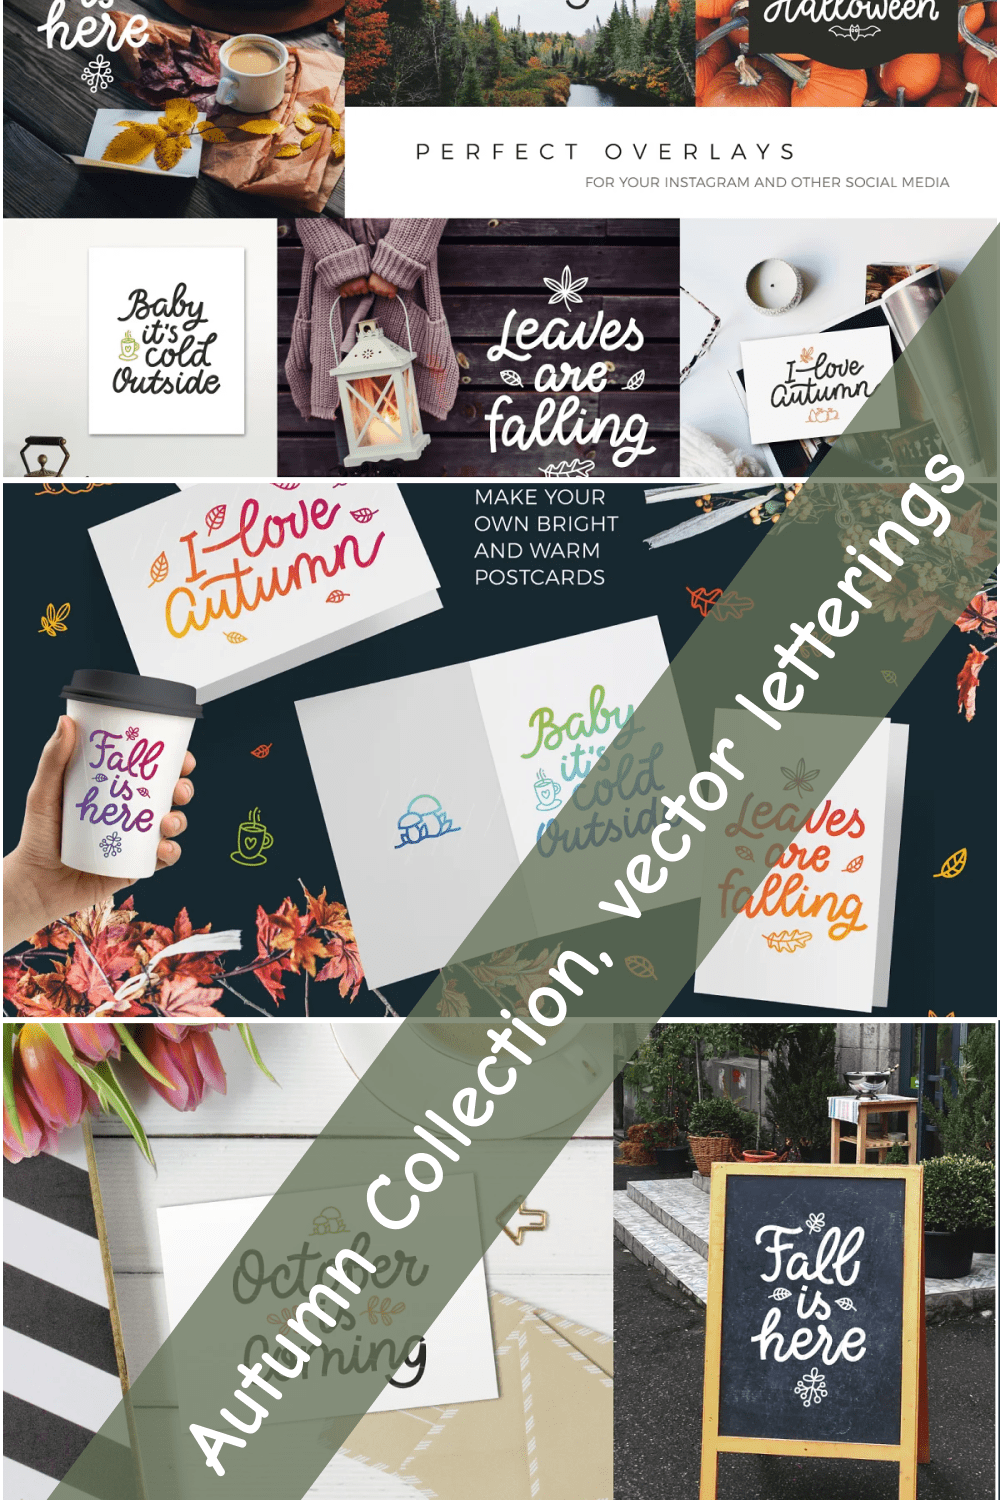 Autumn Collection, Vector Letterings.